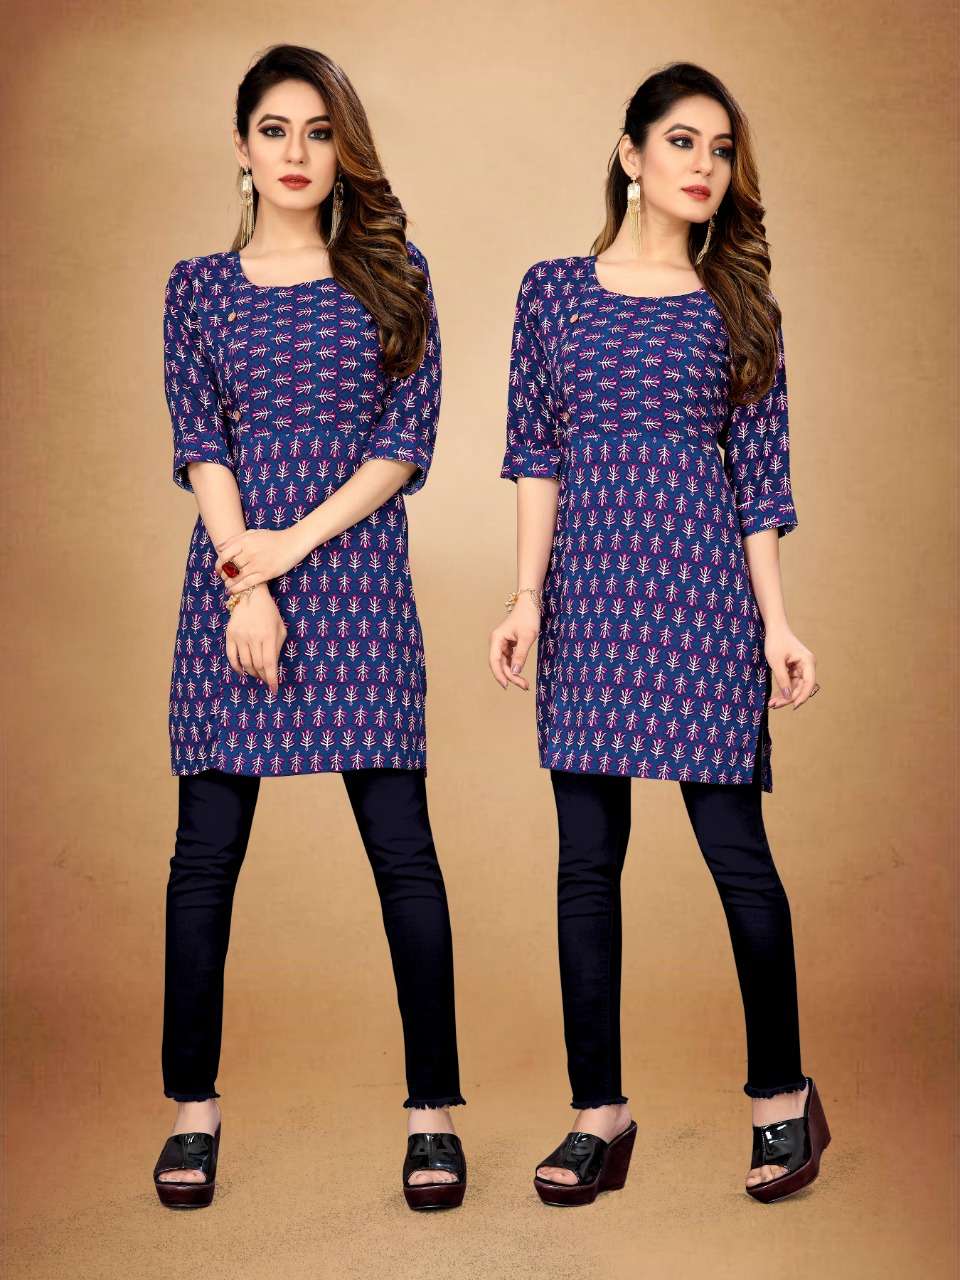 GULKAND BY WATERMELON 2901 TO 2908 SERIES DESIGNER BEAUTIFUL STYLISH FANCY COLORFUL PARTY WEAR & OCCASIONAL WEAR HEAVY RAYON PRINTED KURTIS AT WHOLESALE PRICE